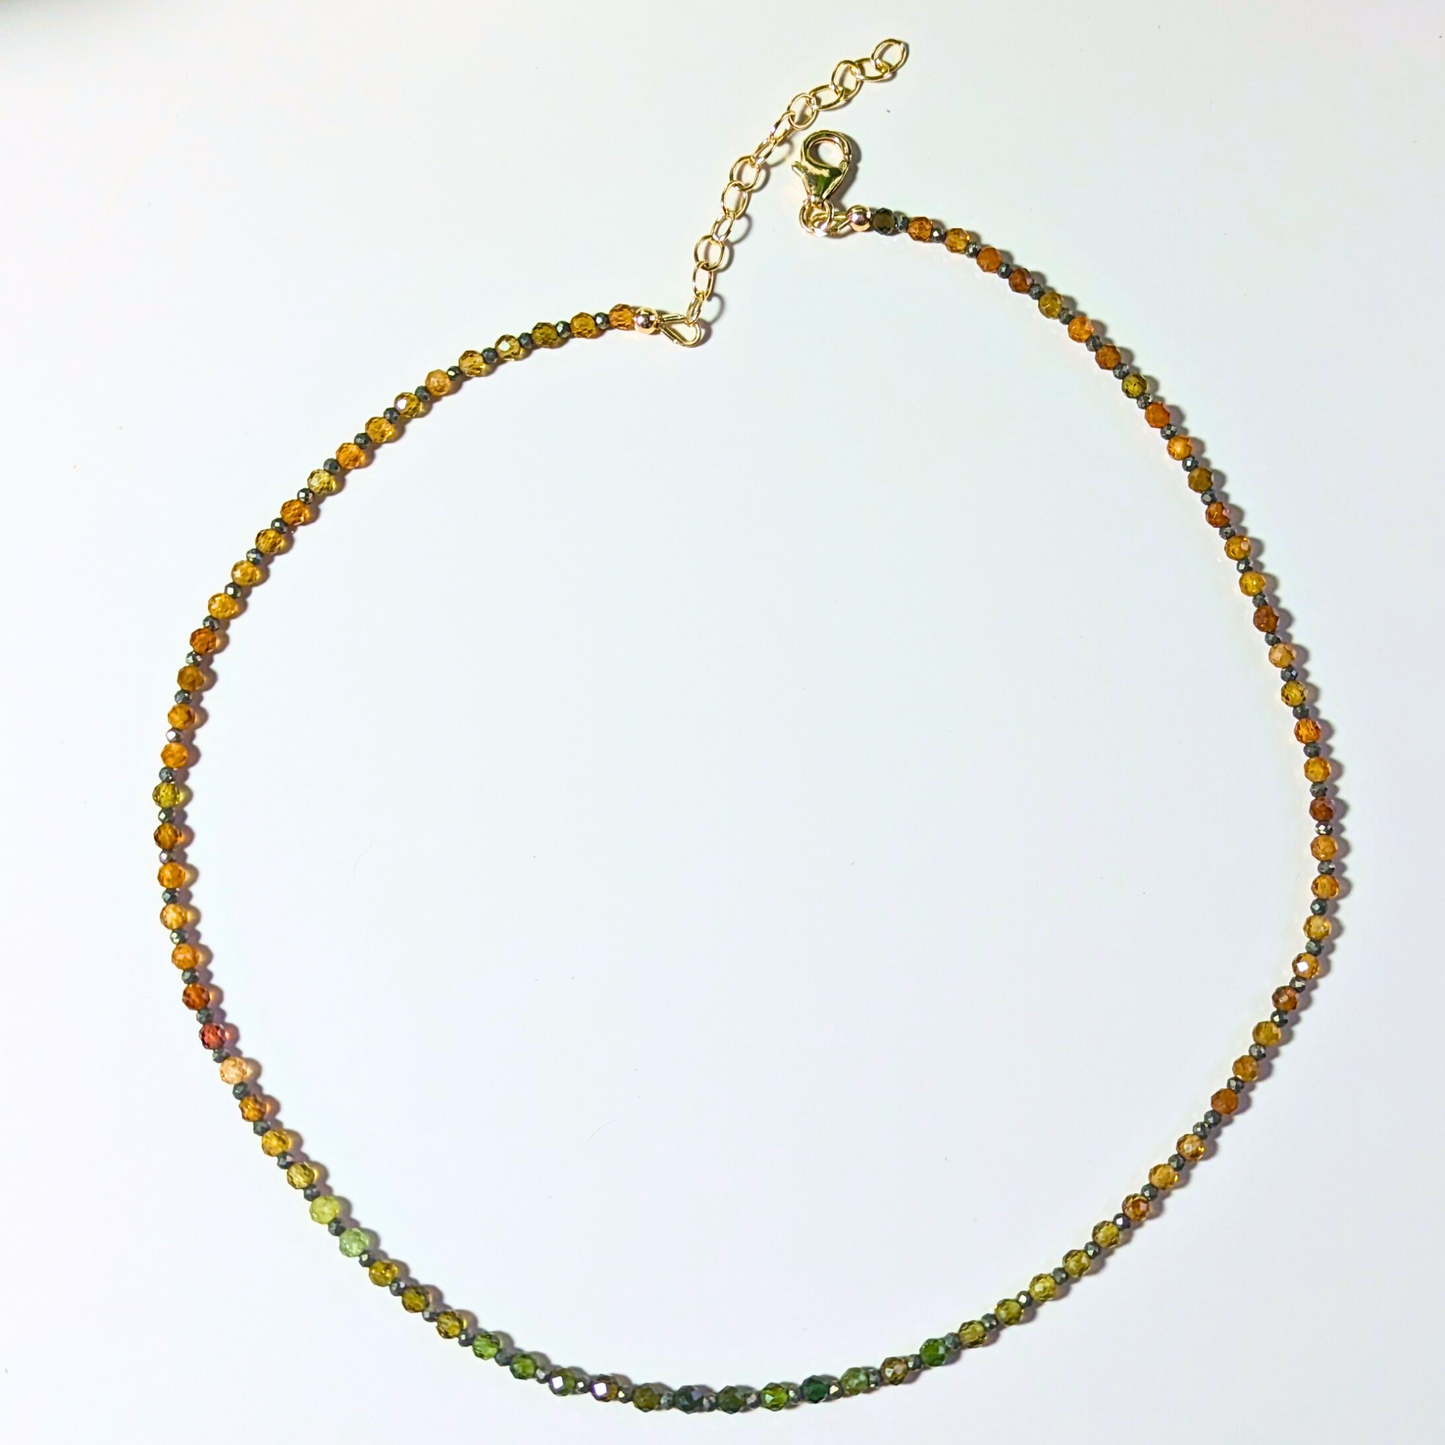 Enchanted Spectrum: Faceted Tourmaline Ombre Necklace with Gold Filled Accents